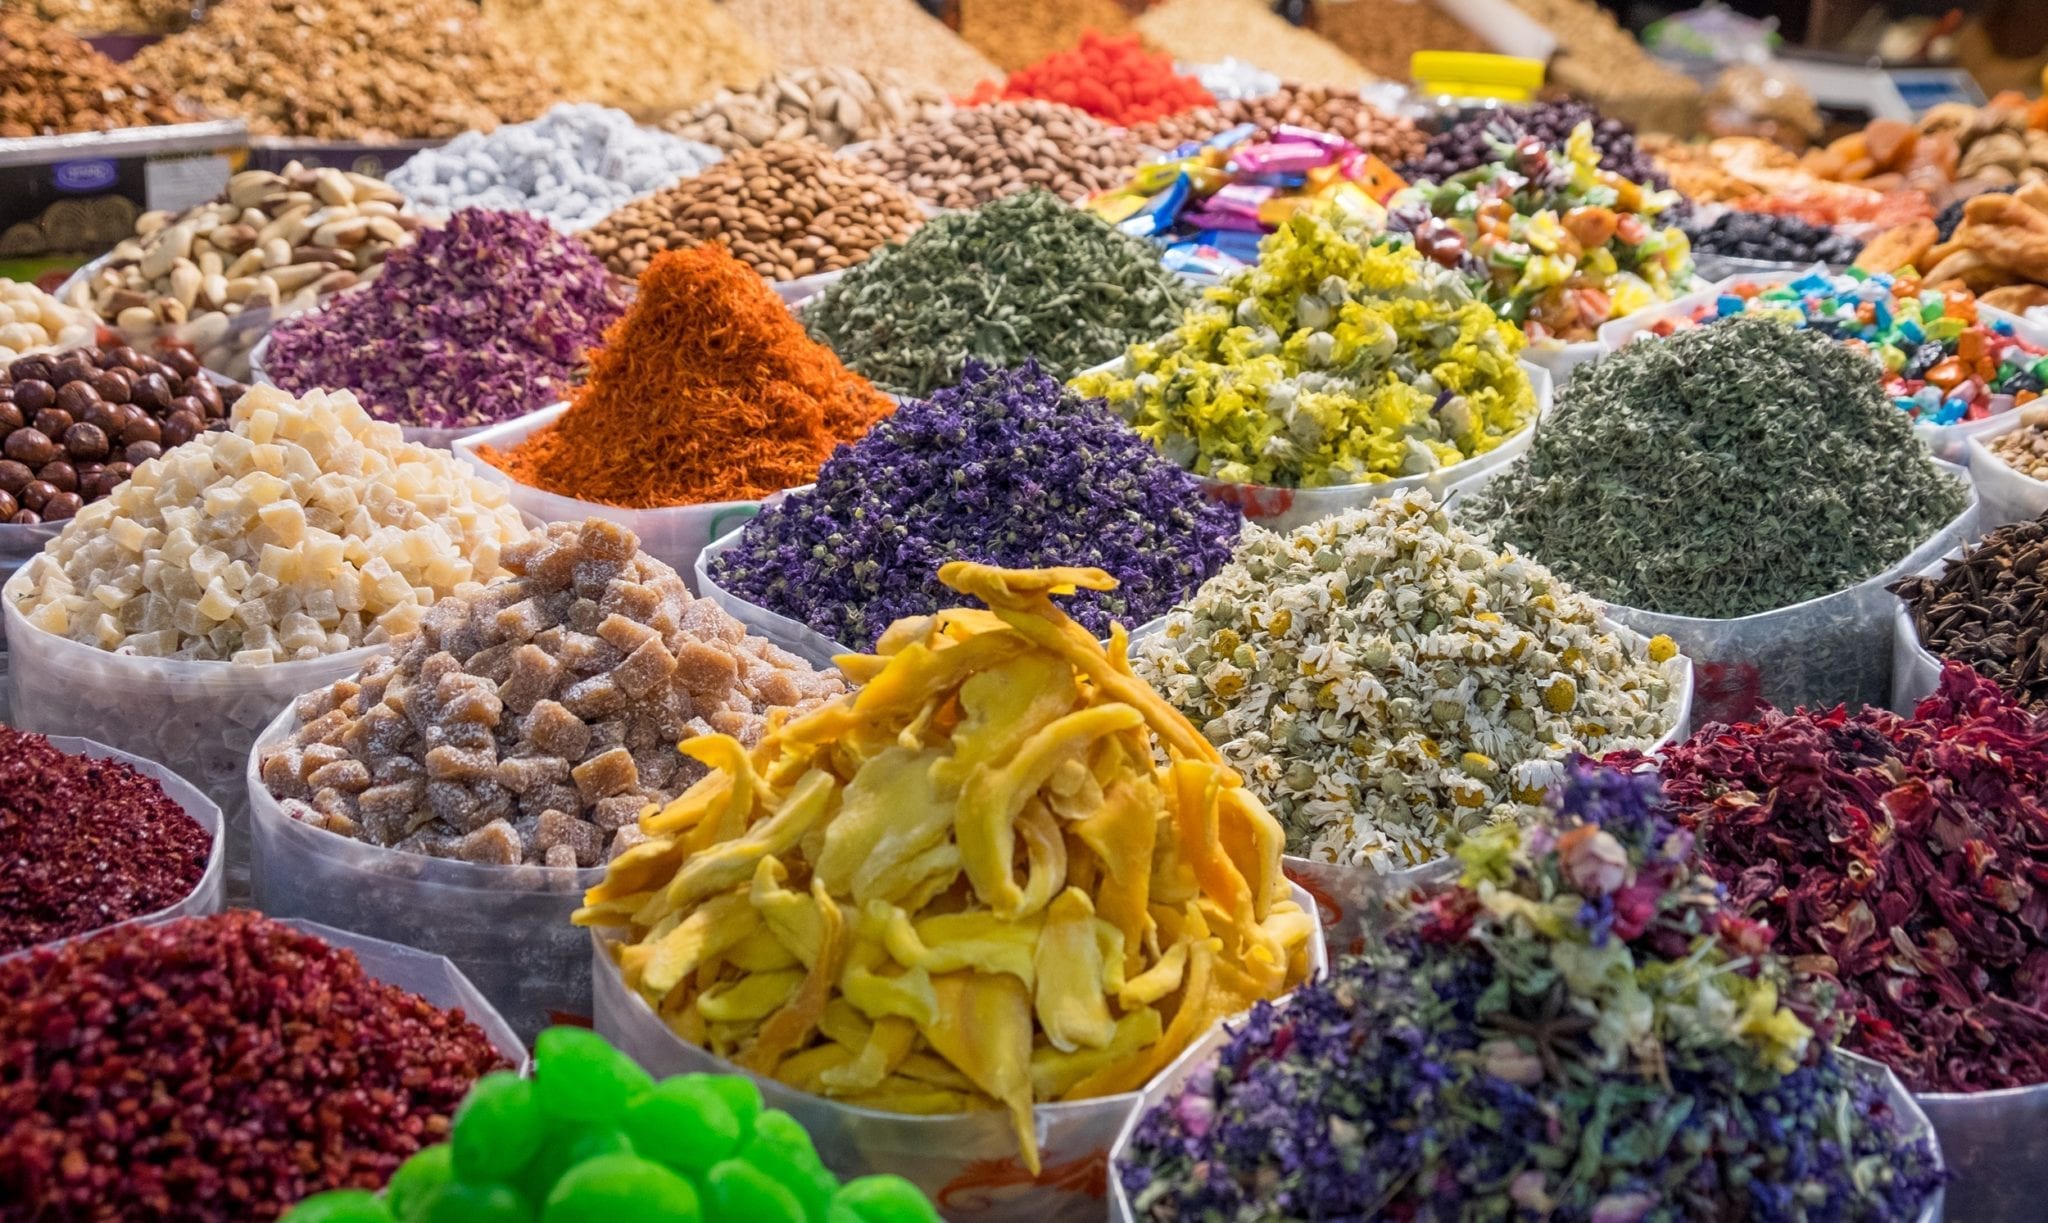 Piles of spices and dried fruits in perfectly conical piles in Baku, Azerbaijan.